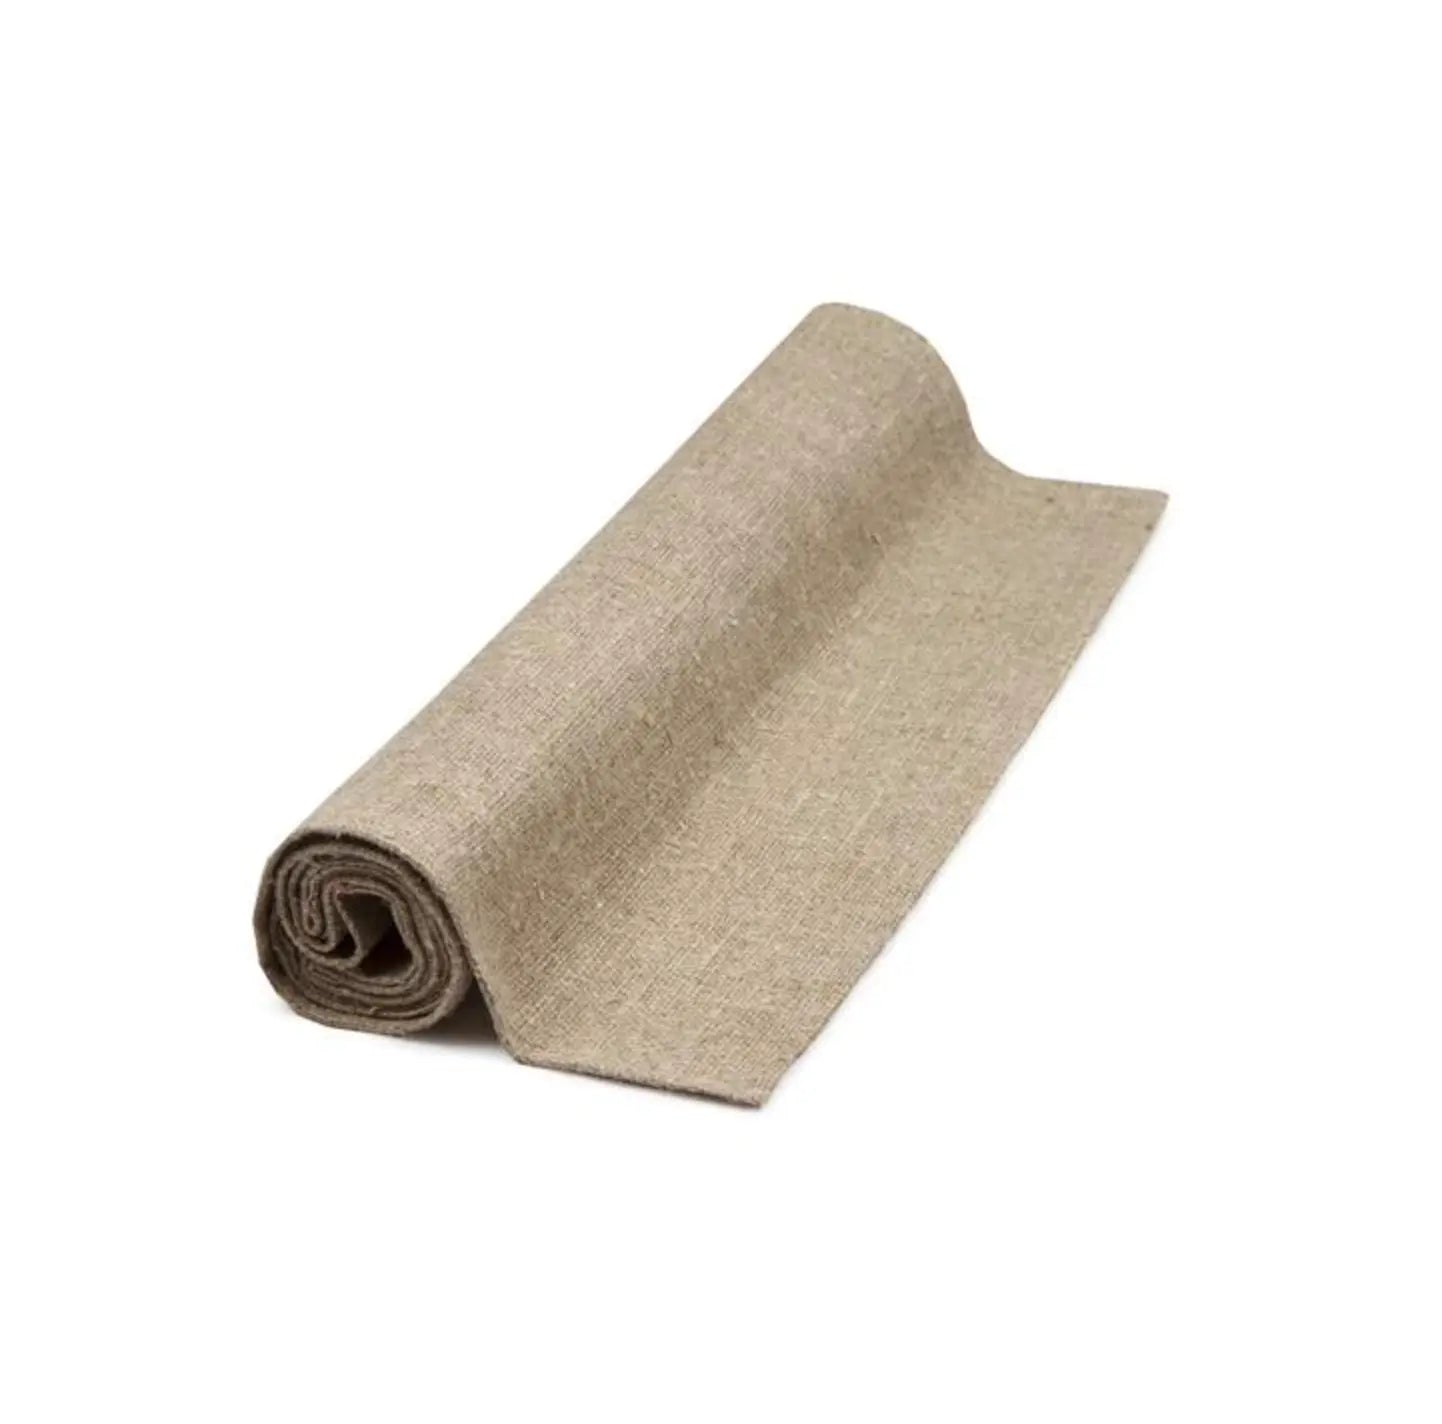 Burlap Linen Table Runners - Home Smith